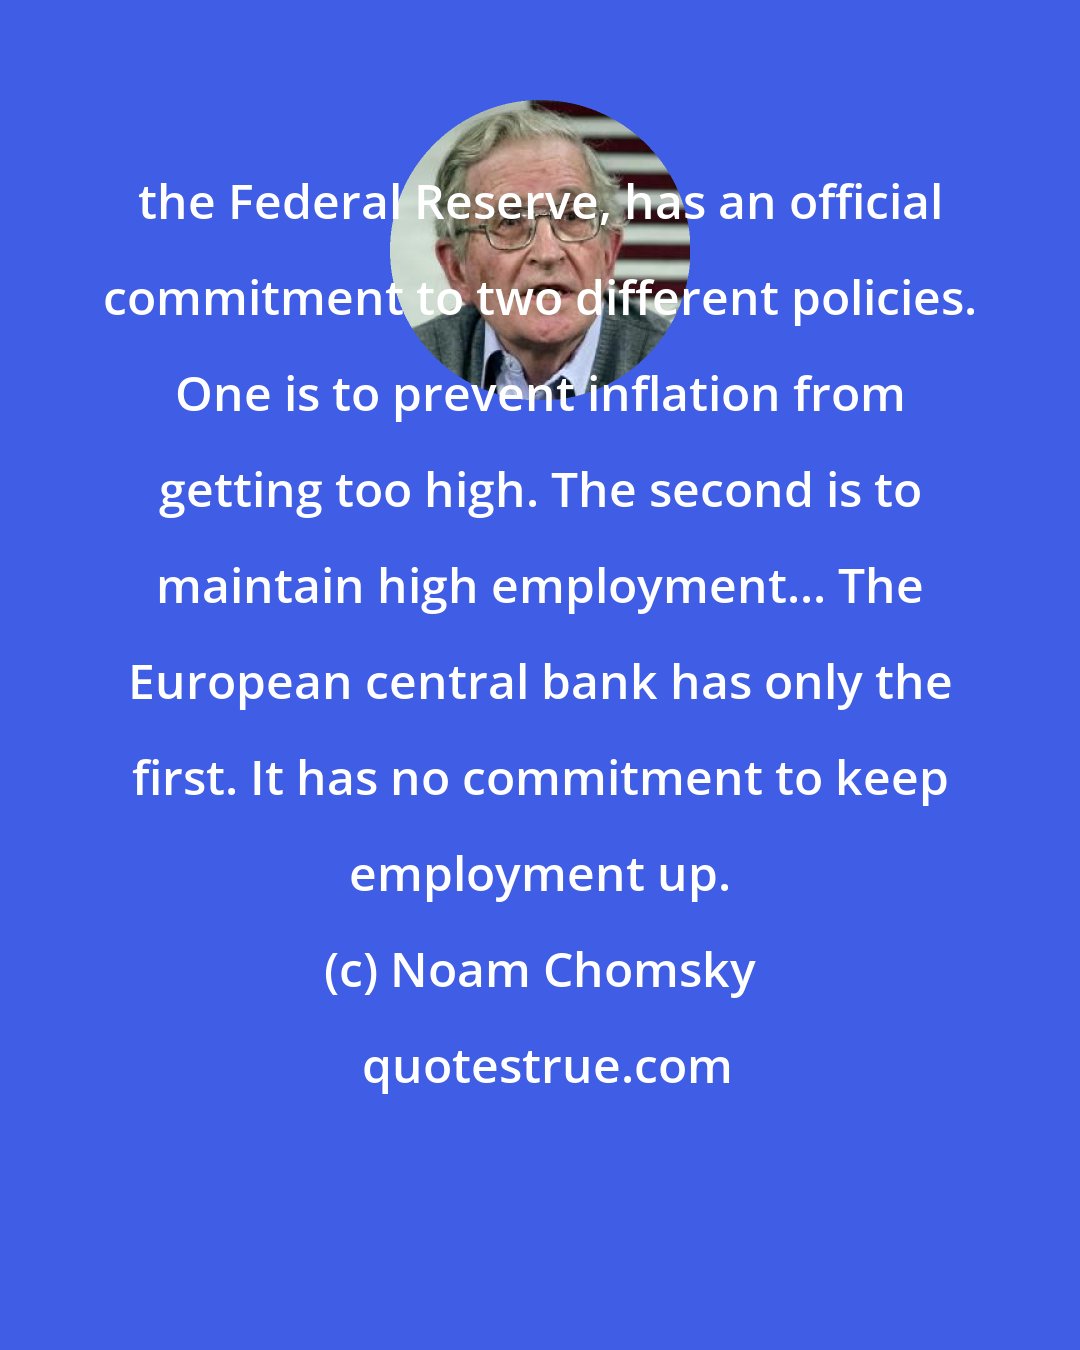 Noam Chomsky: the Federal Reserve, has an official commitment to two different policies. One is to prevent inflation from getting too high. The second is to maintain high employment... The European central bank has only the first. It has no commitment to keep employment up.